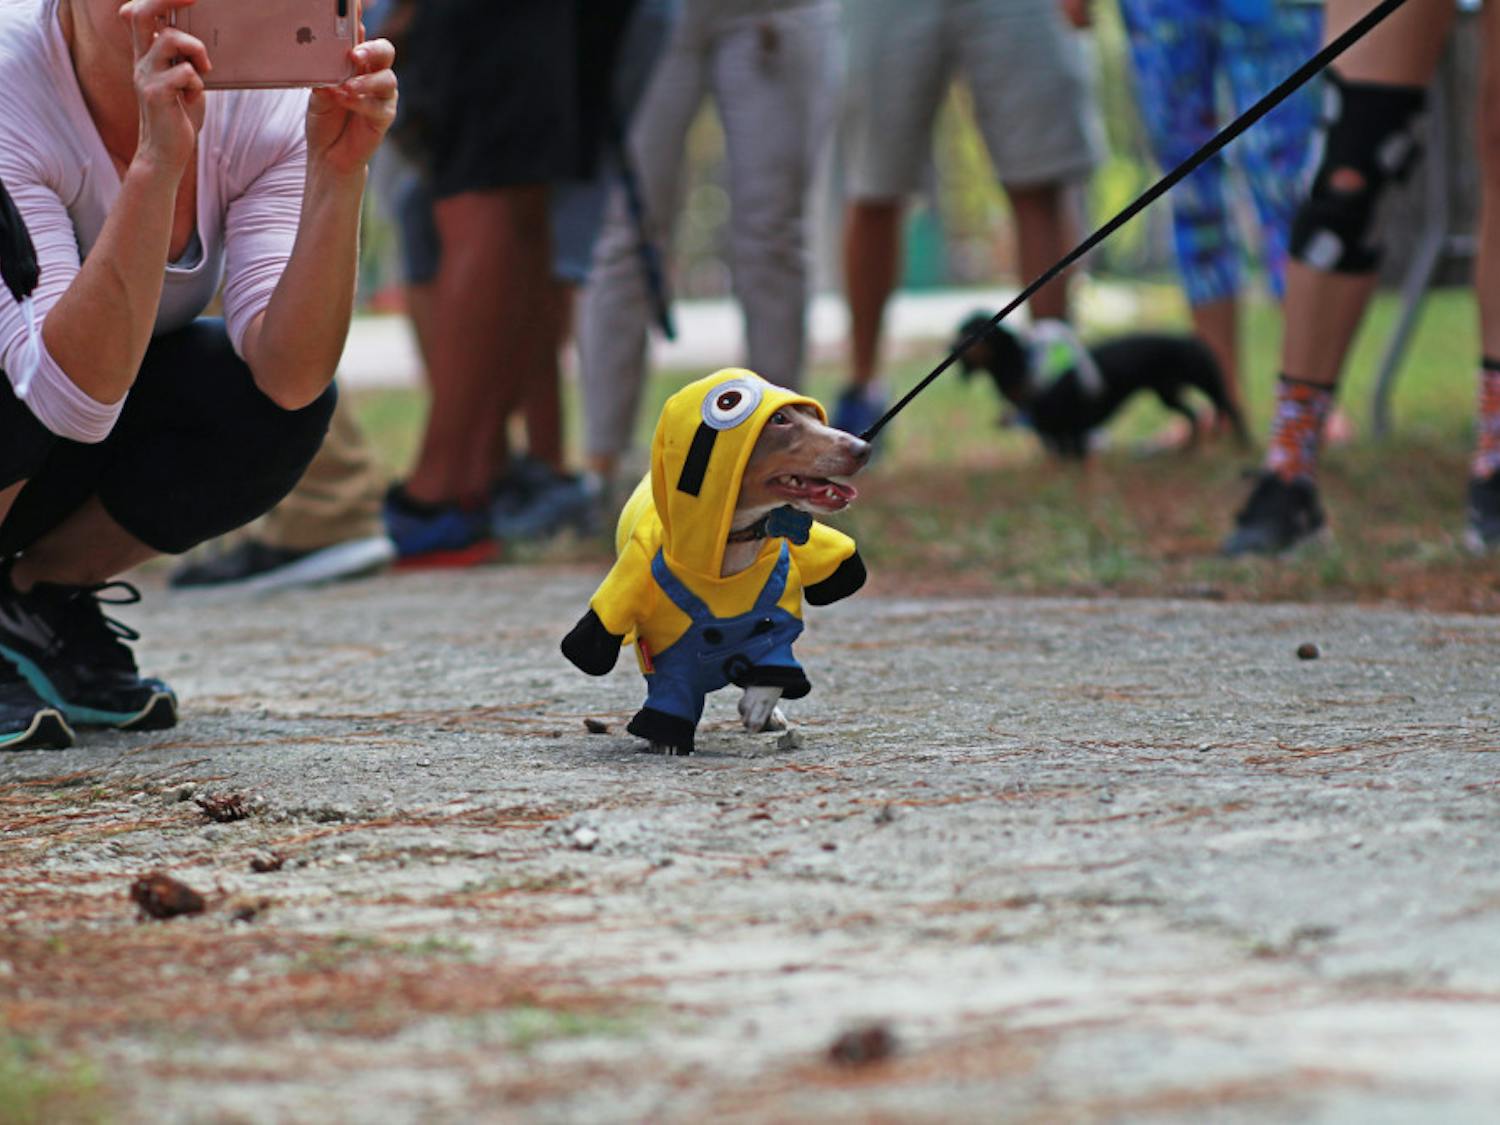 Tracker, a miniature dachshund, struts down the runway dressed as a minion from the movie series “Despicable Me.” Tracker won second place in the costume contest that was held after the races.